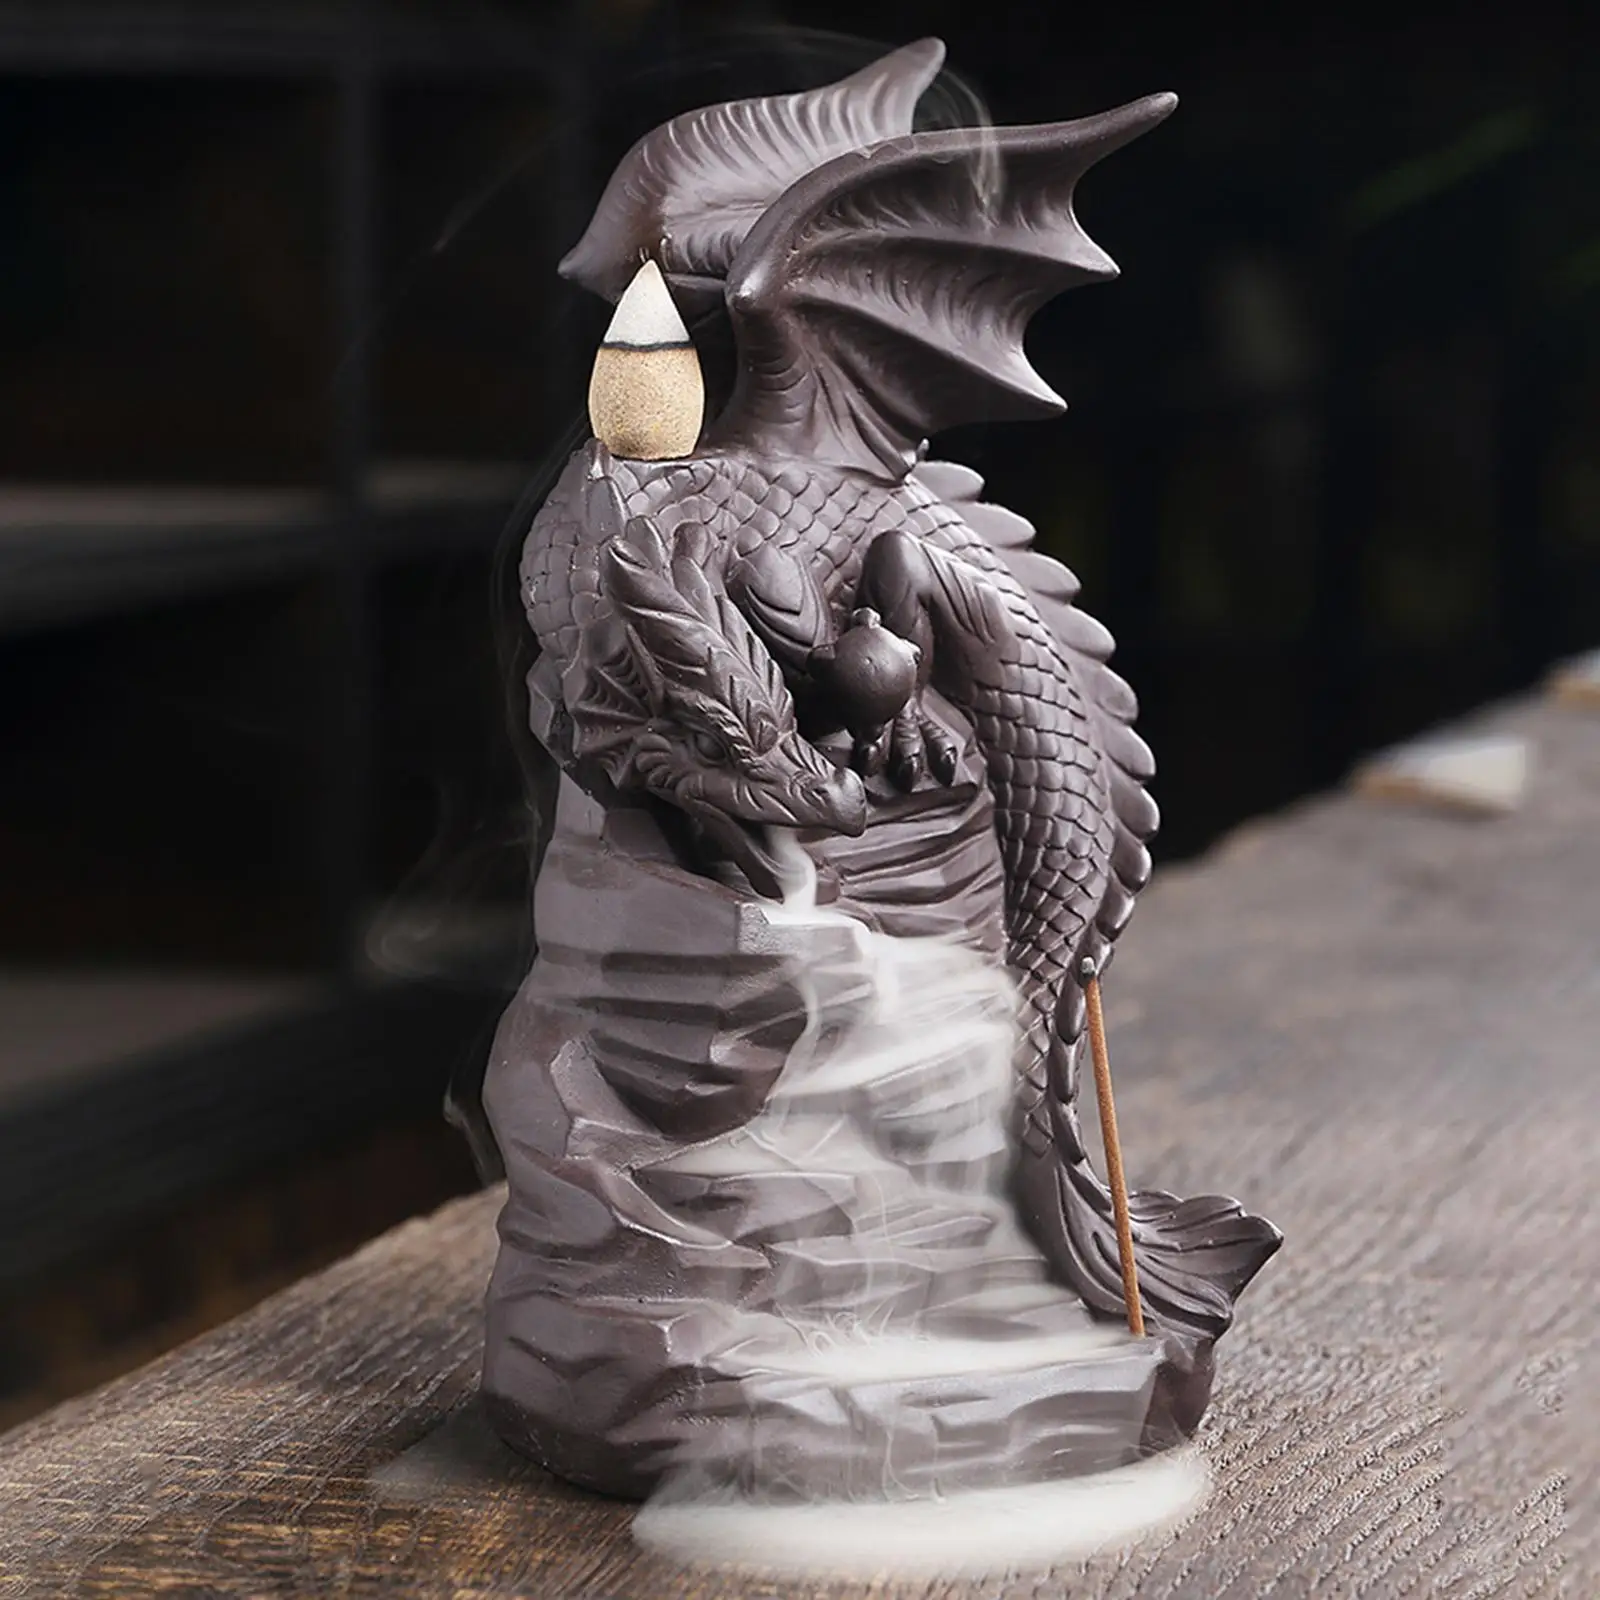 Dragon Backflow Incense Burner with Incense Cone Smoke Waterfall Incense Burner Holder Aromatherapy Home Decor Censer